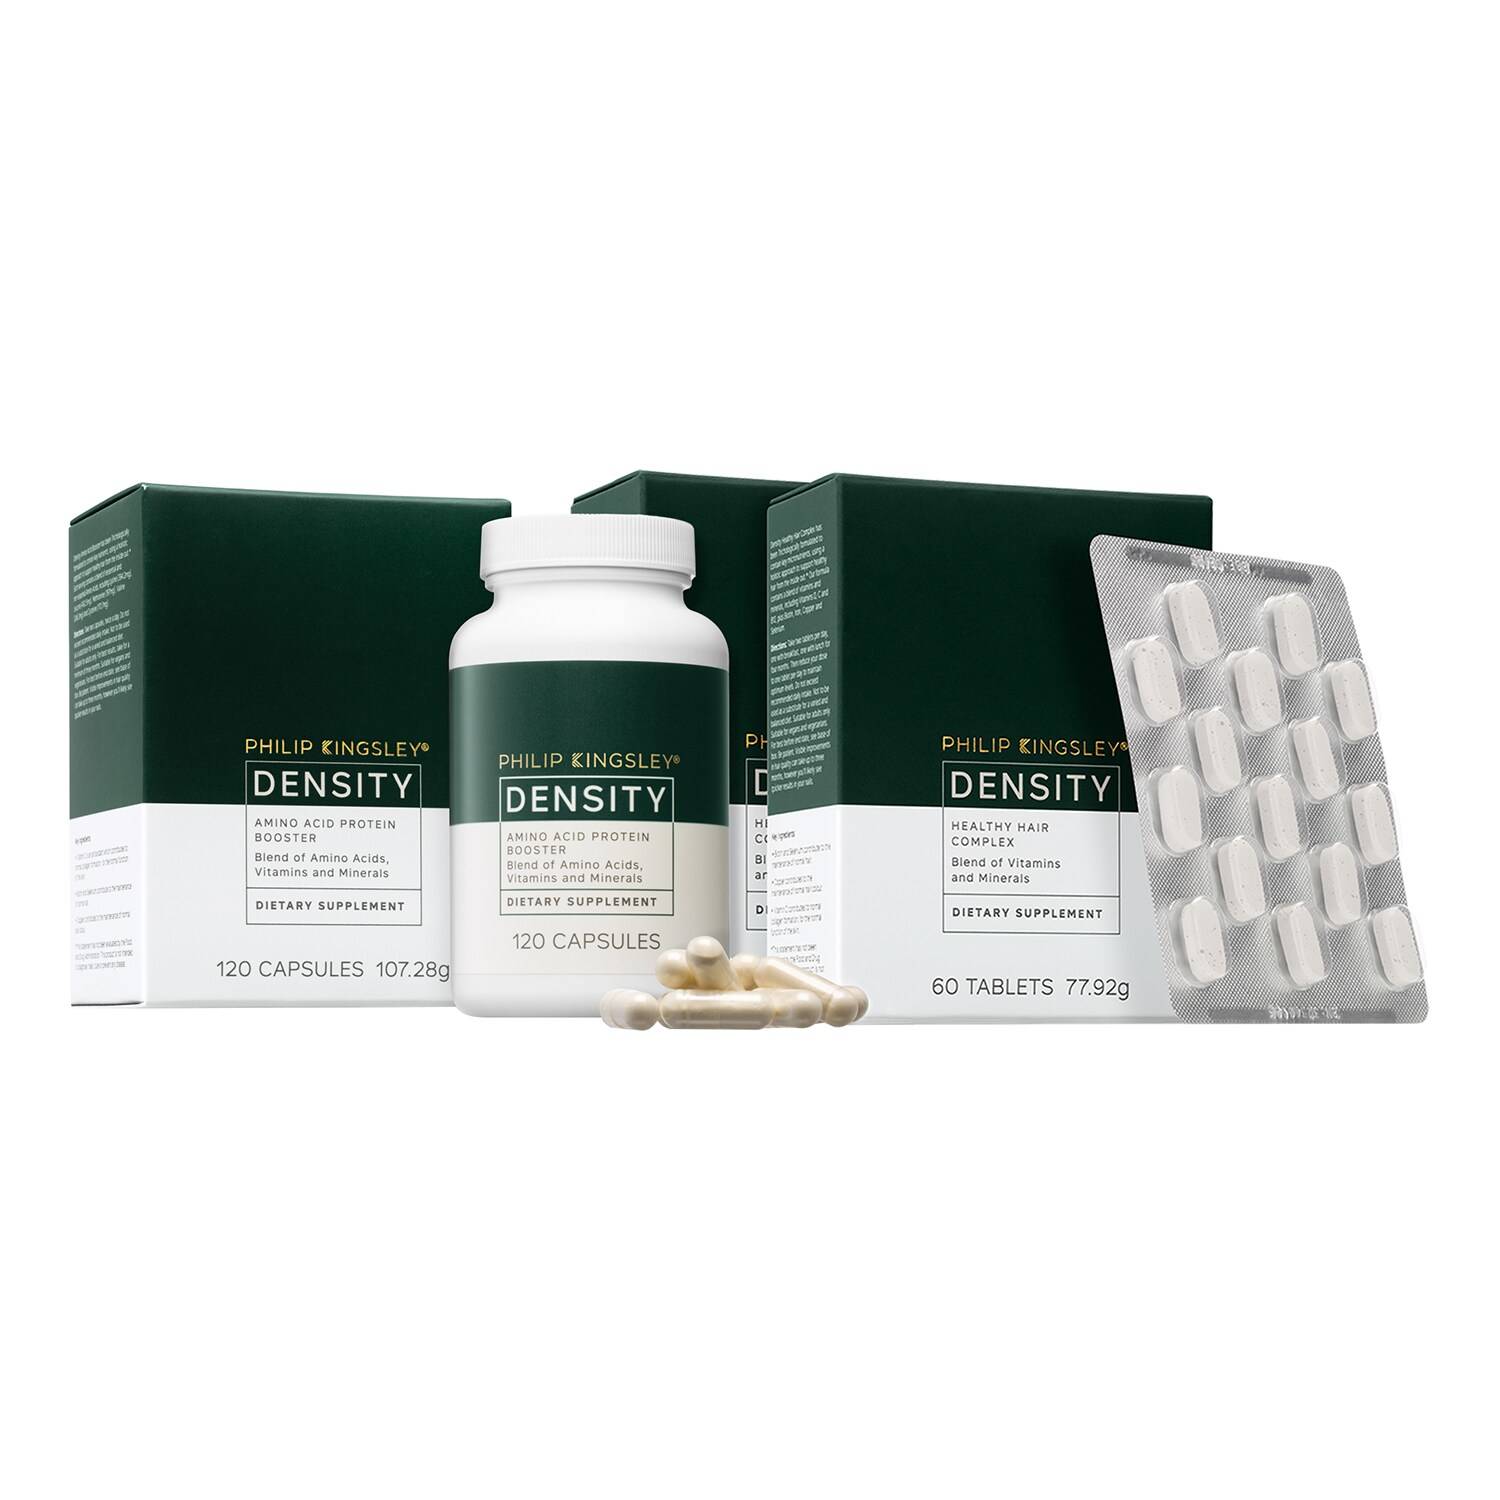 PHILIP KINGSLEY Density Supplements Two Month Starter Collection